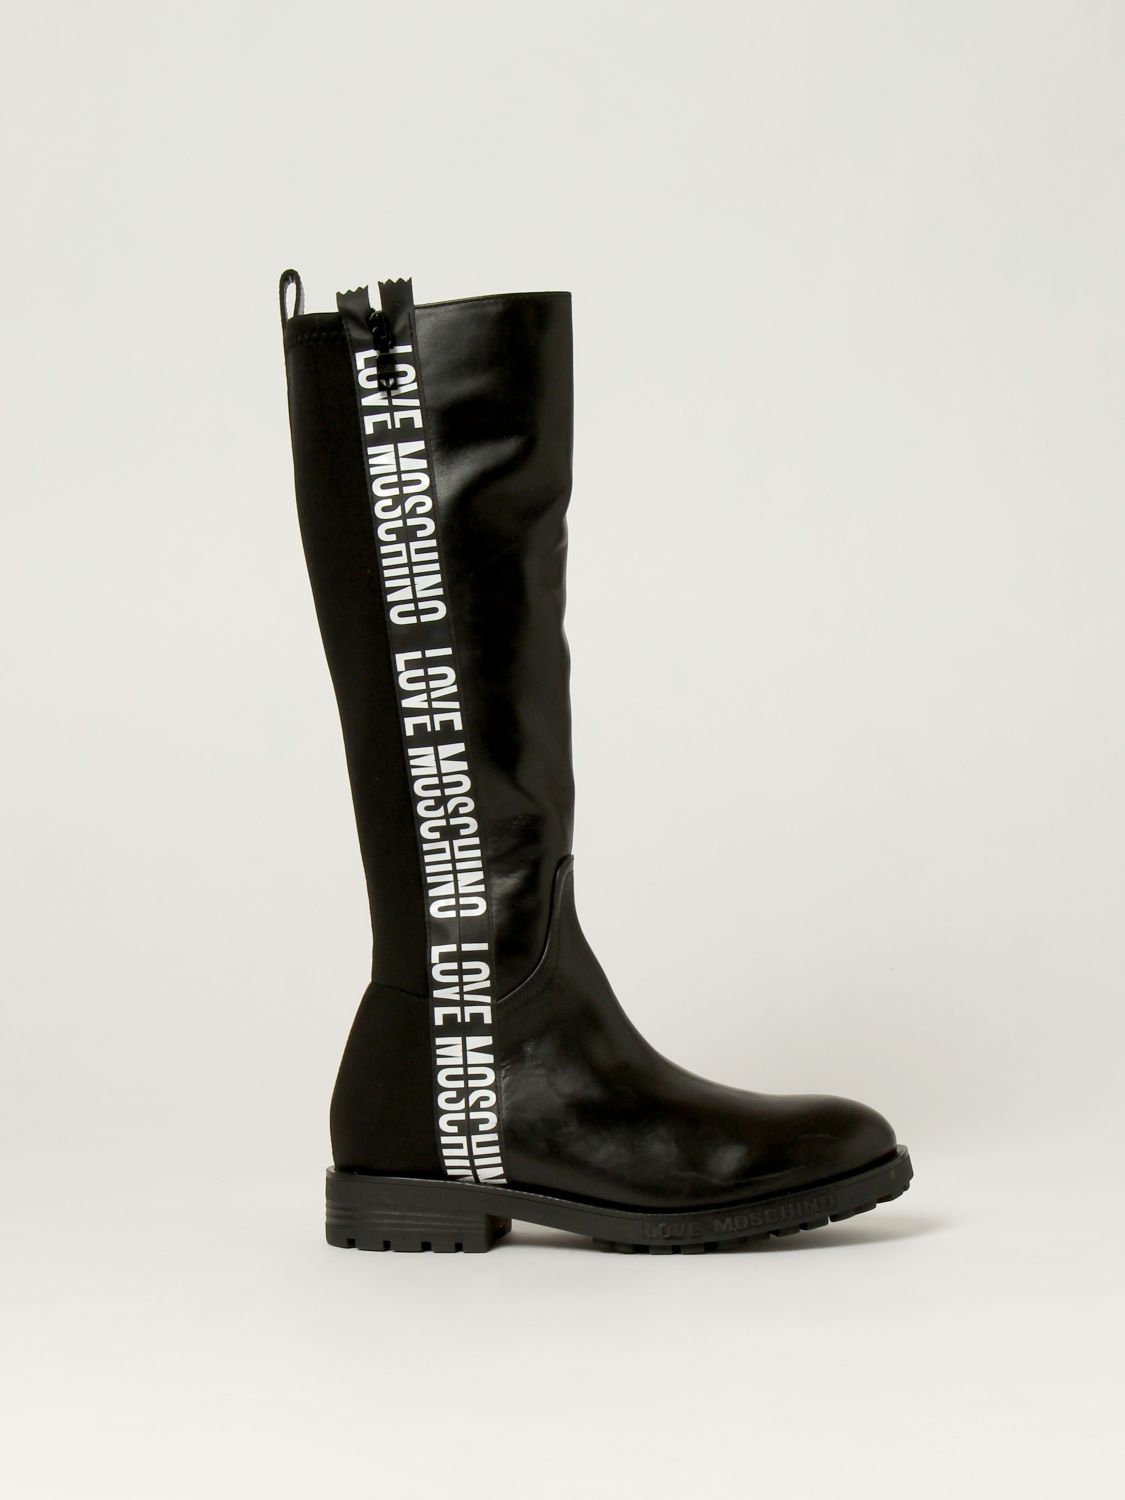 Finally Easy light's LOVE MOSCHINO: women's boots - Black | Love Moschino boots JA26024G1DIA9  online on GIGLIO.COM